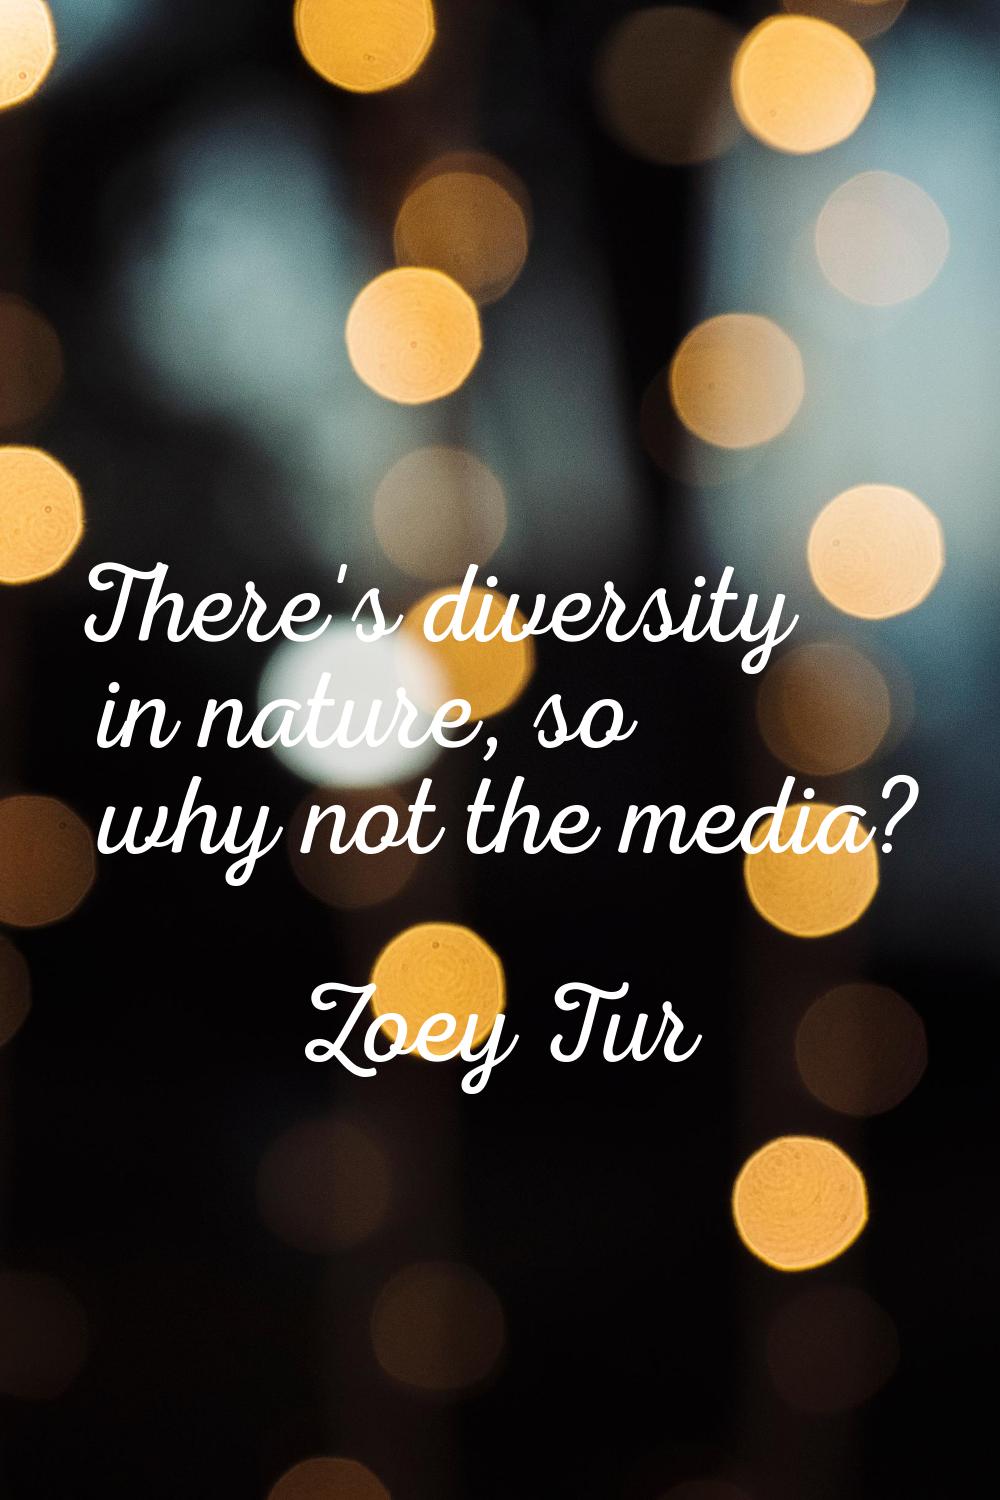 There's diversity in nature, so why not the media?